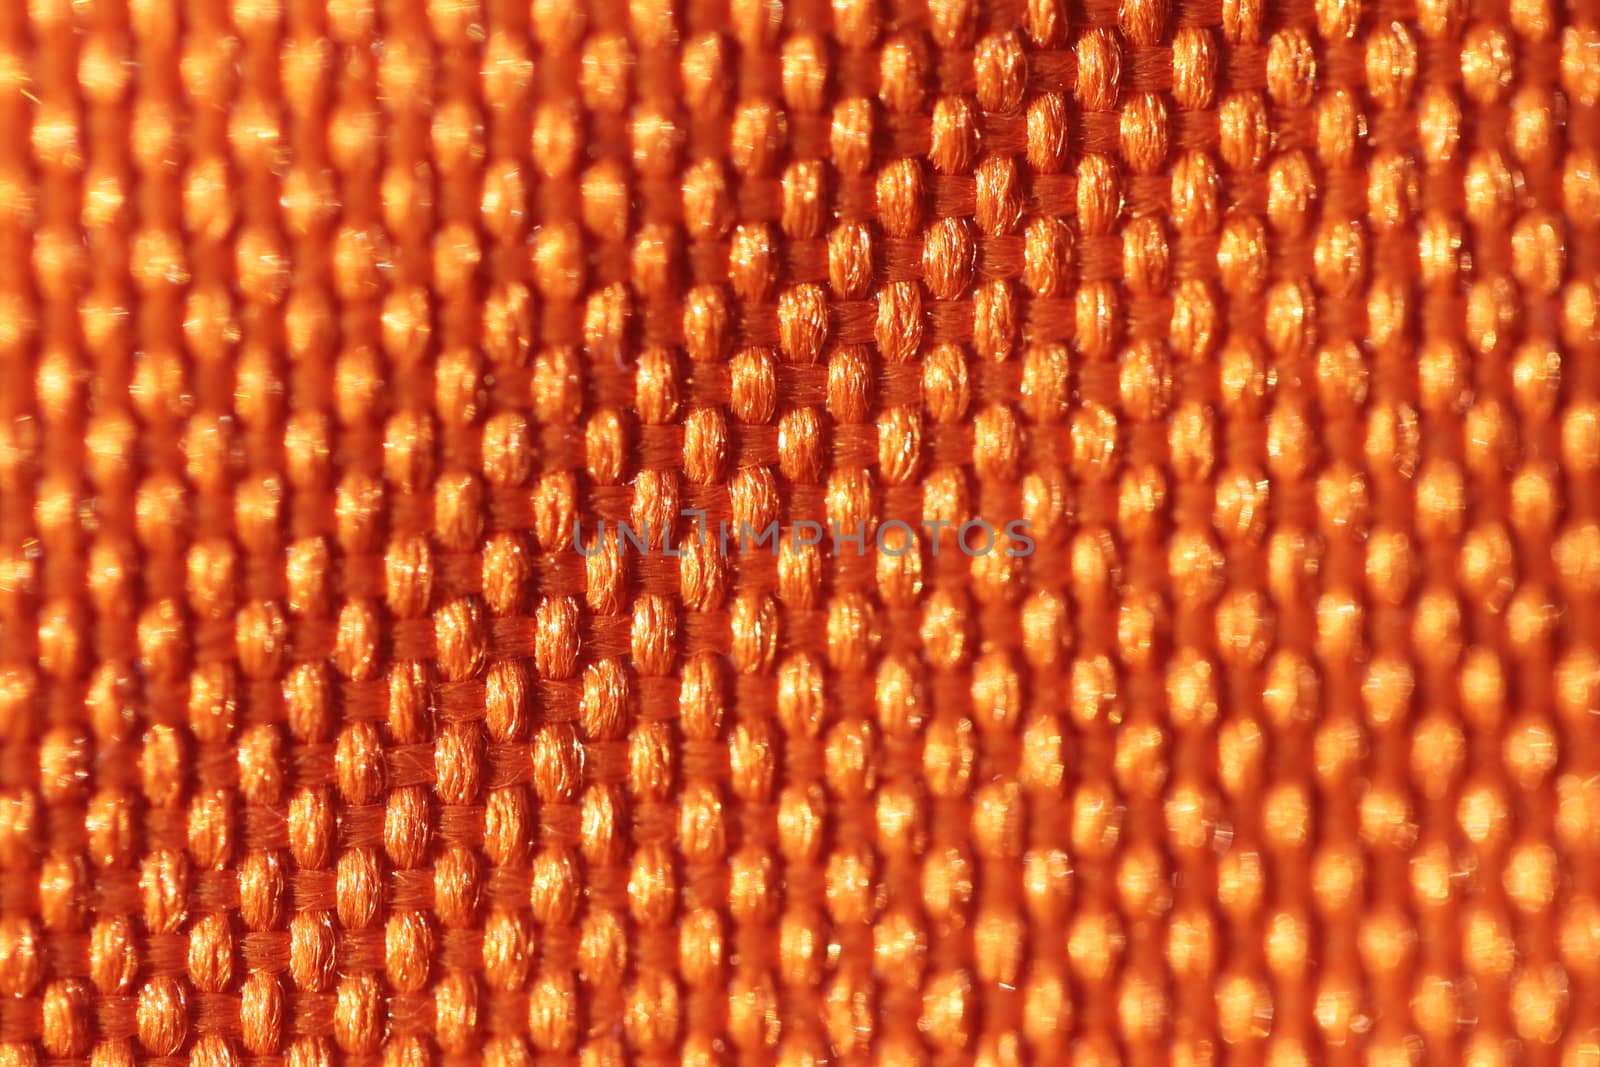 Abstract background of fabric material close up bright macro photo